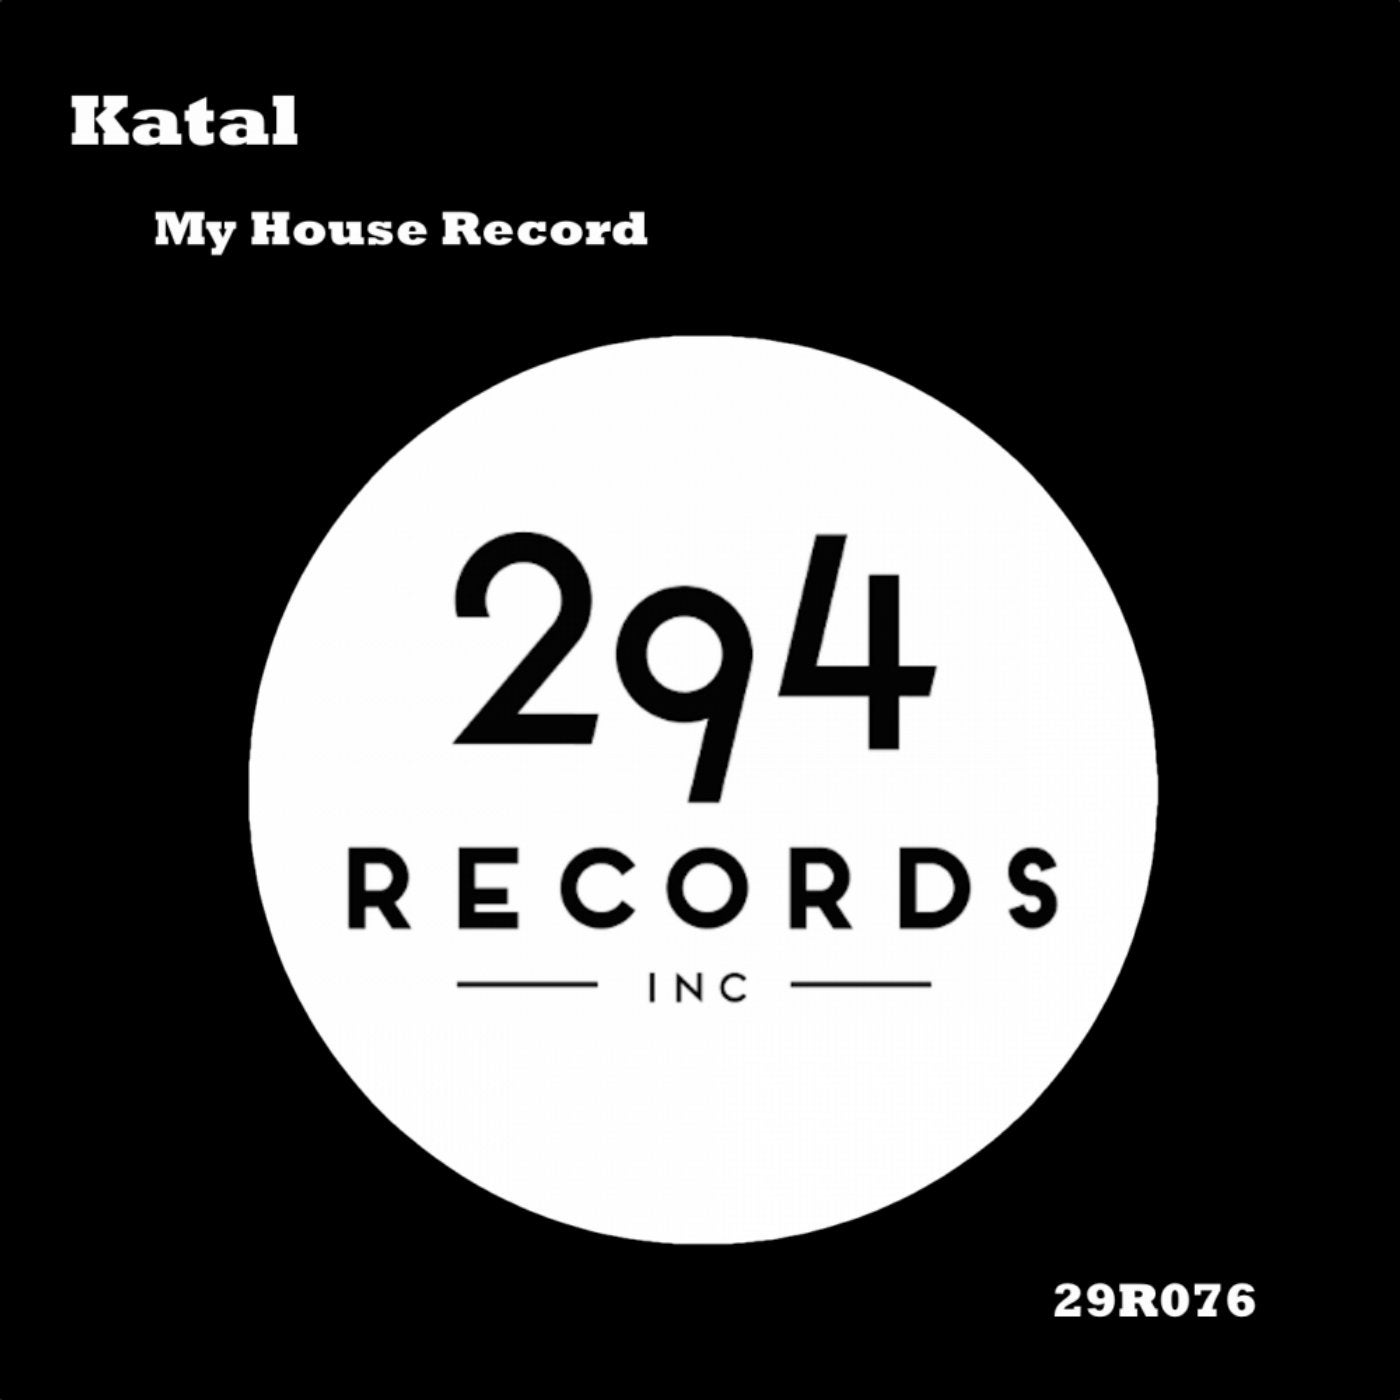 My House Record